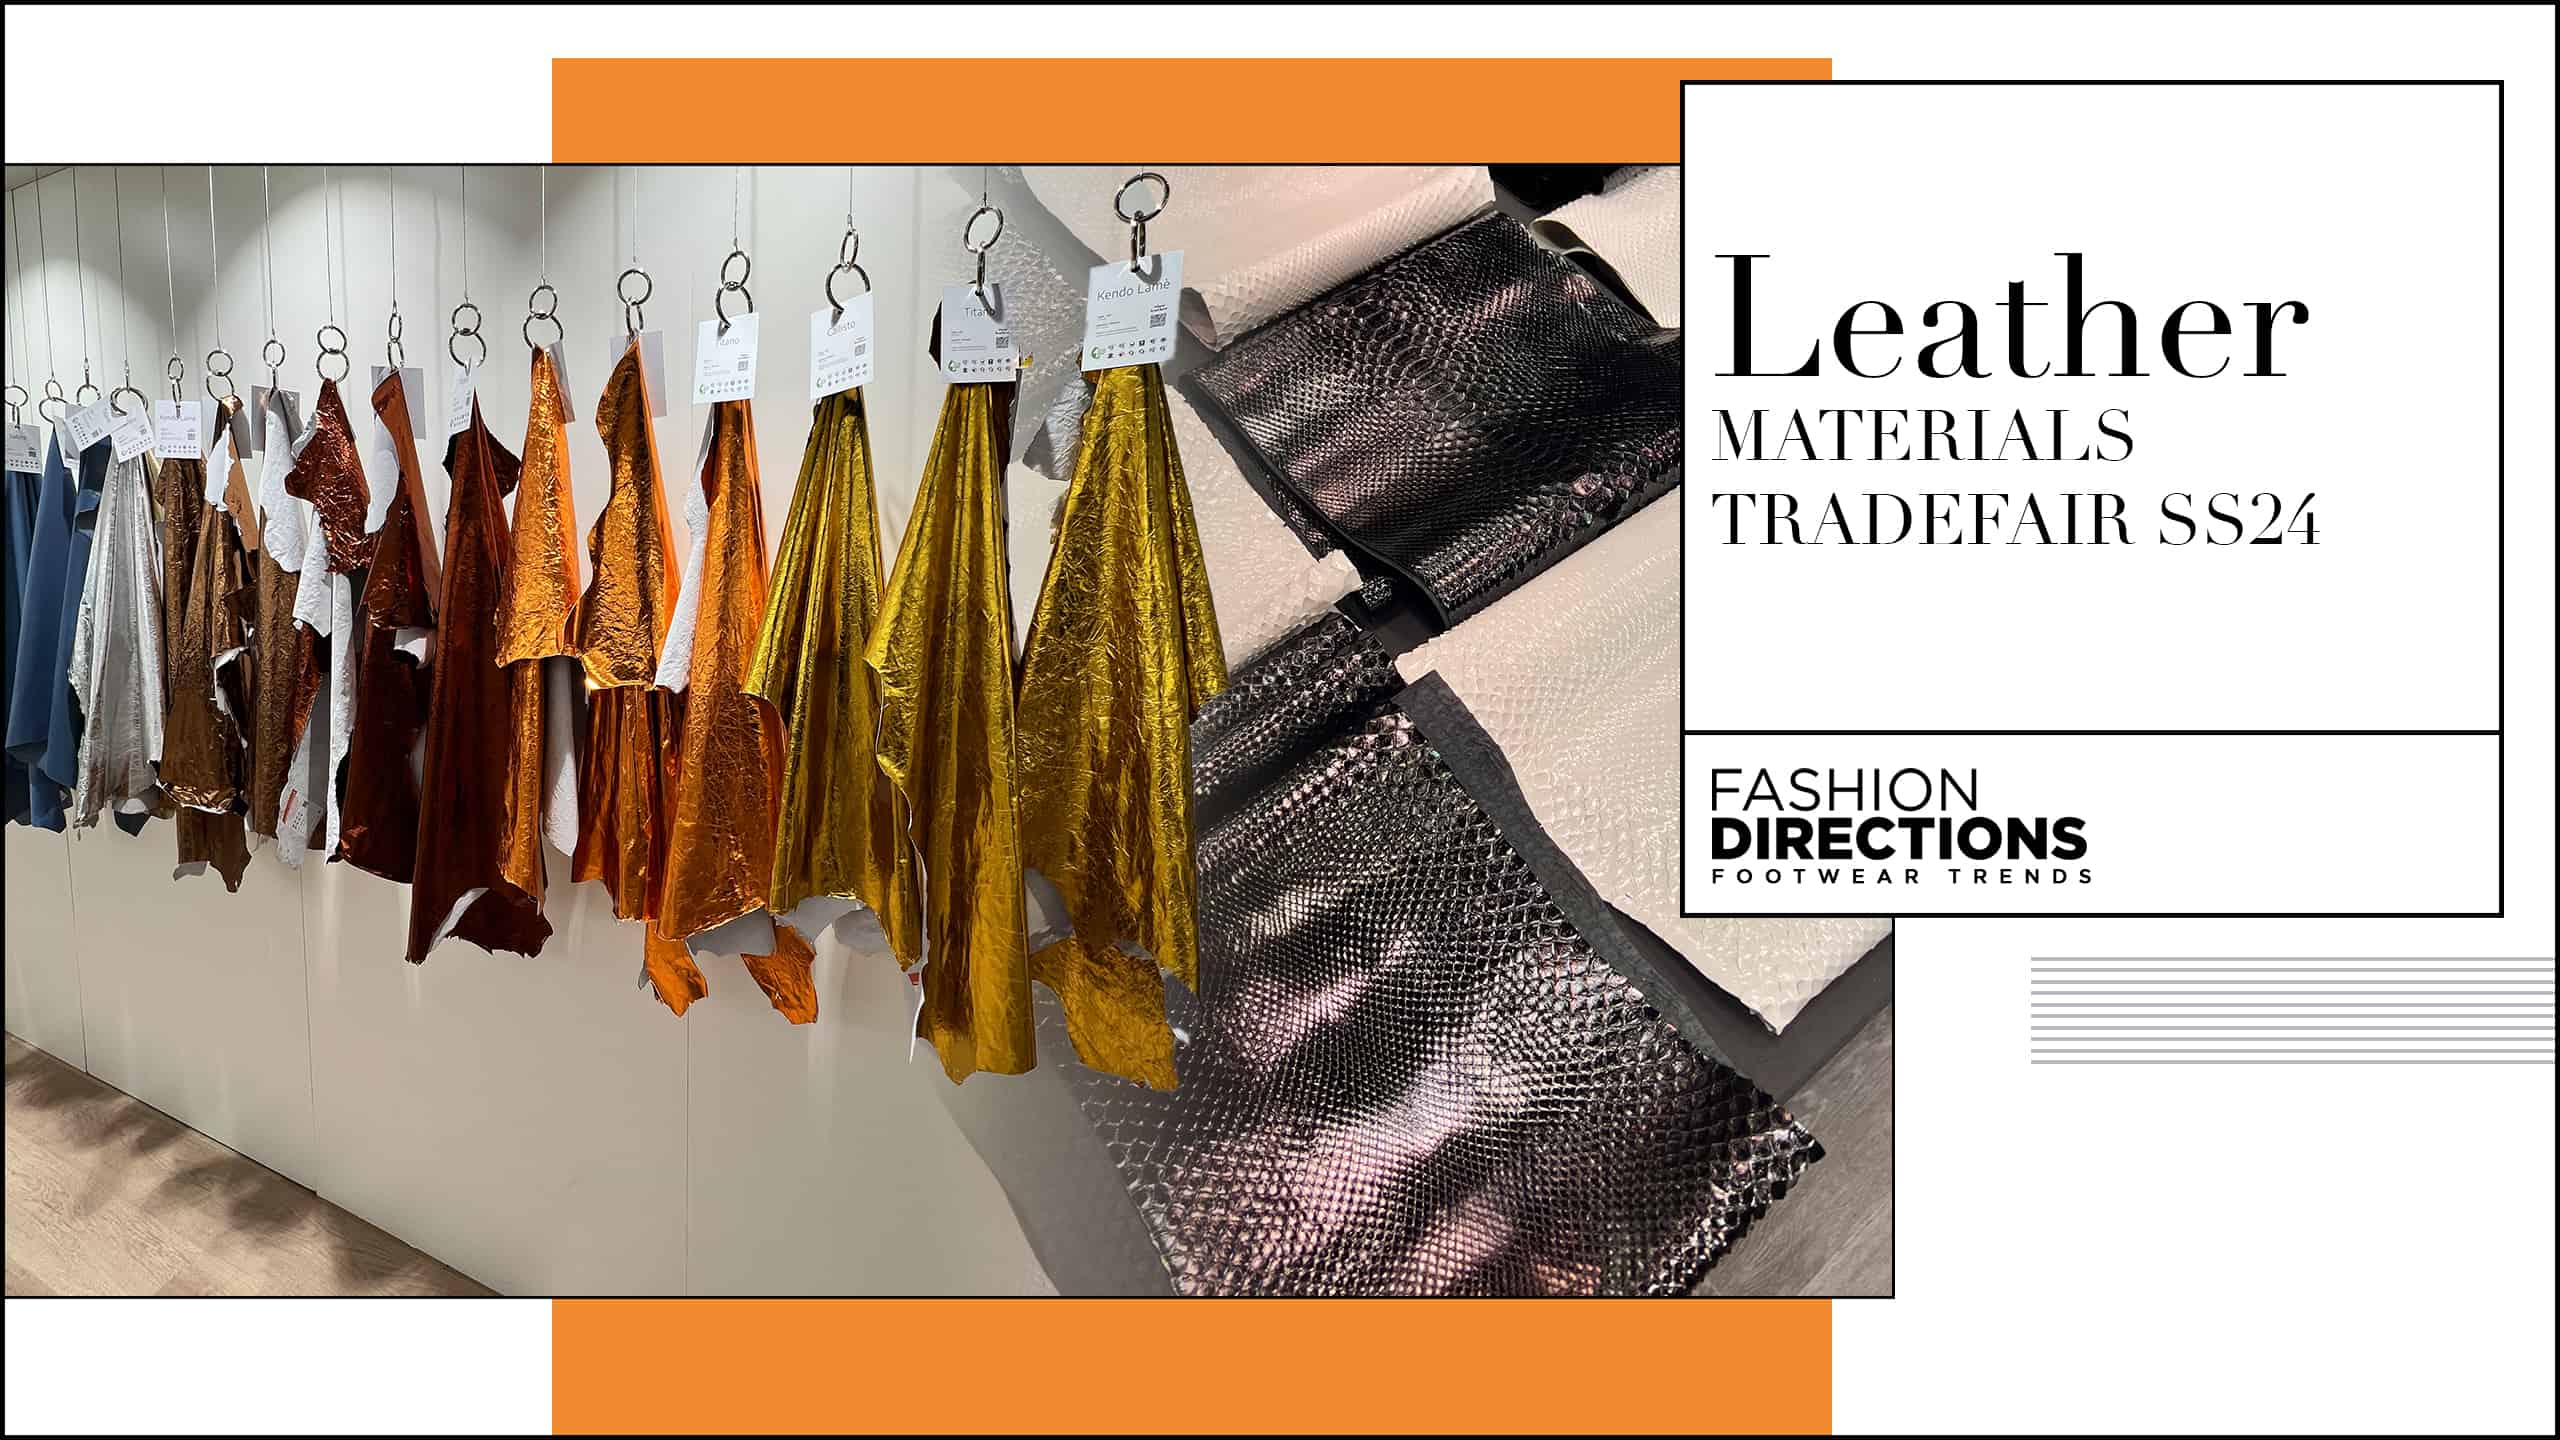 Leather Materials Tradefair ss24